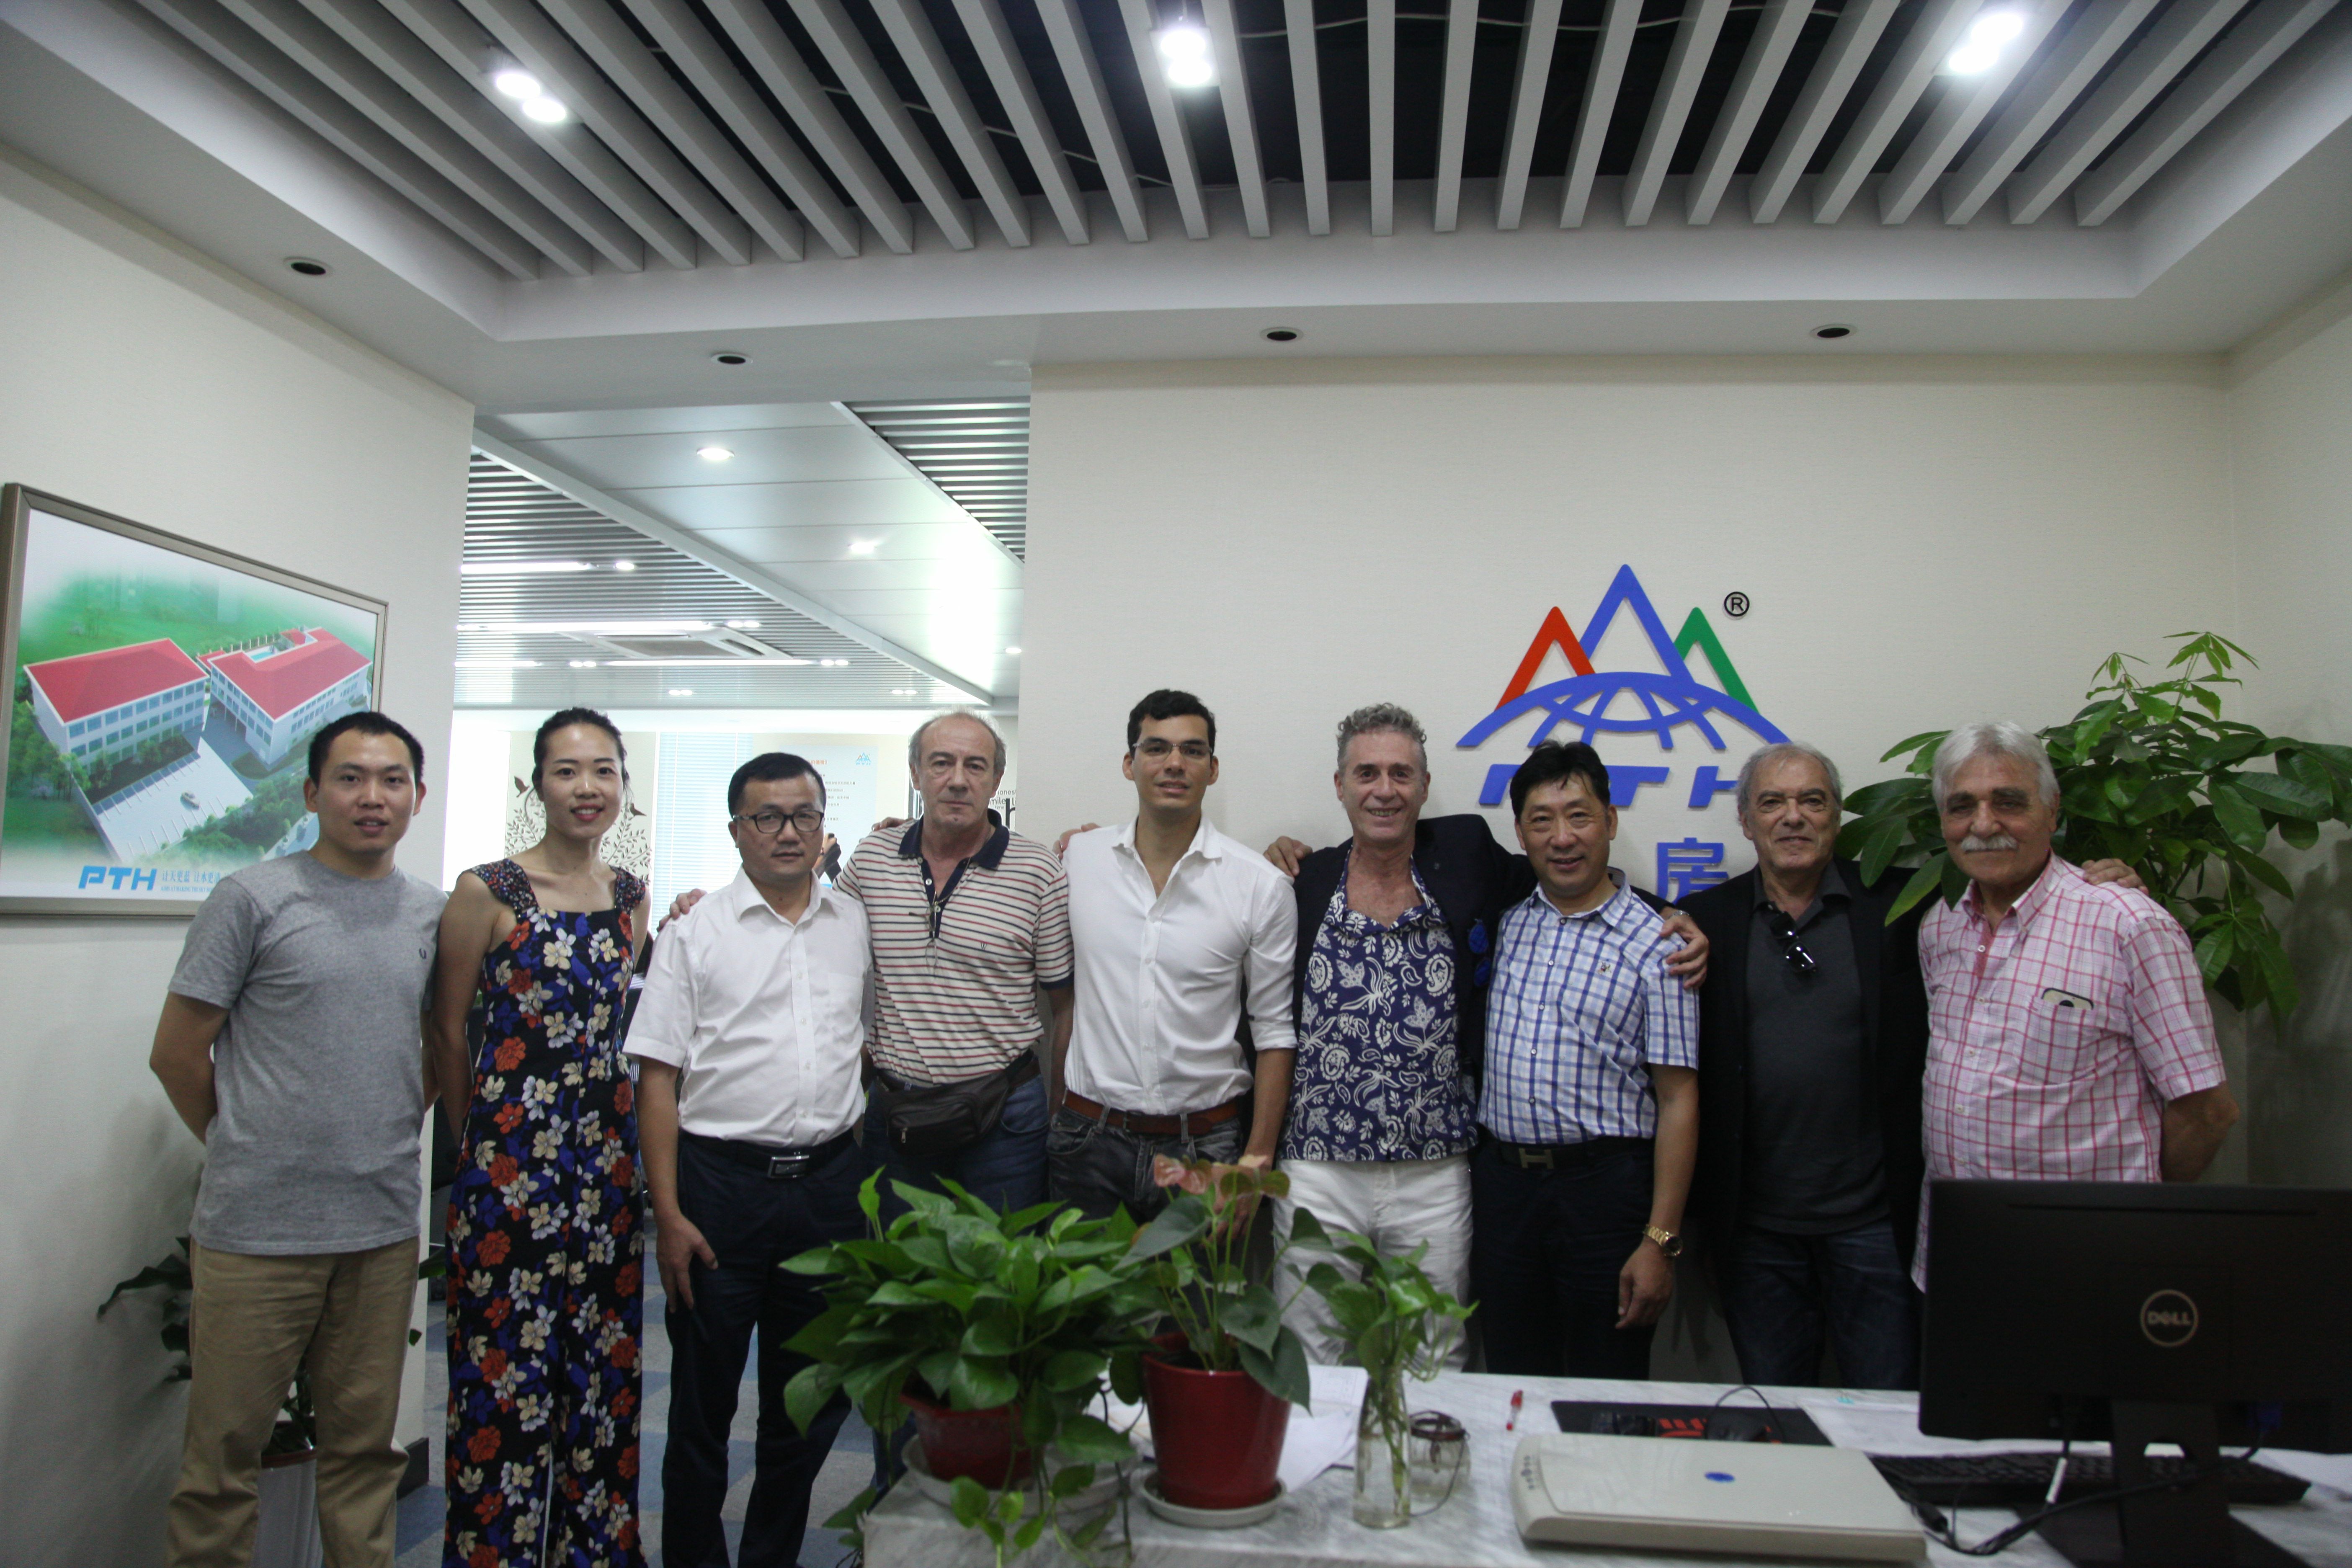 The Famous Real Estate Developer Company From Argentina Visited PTH